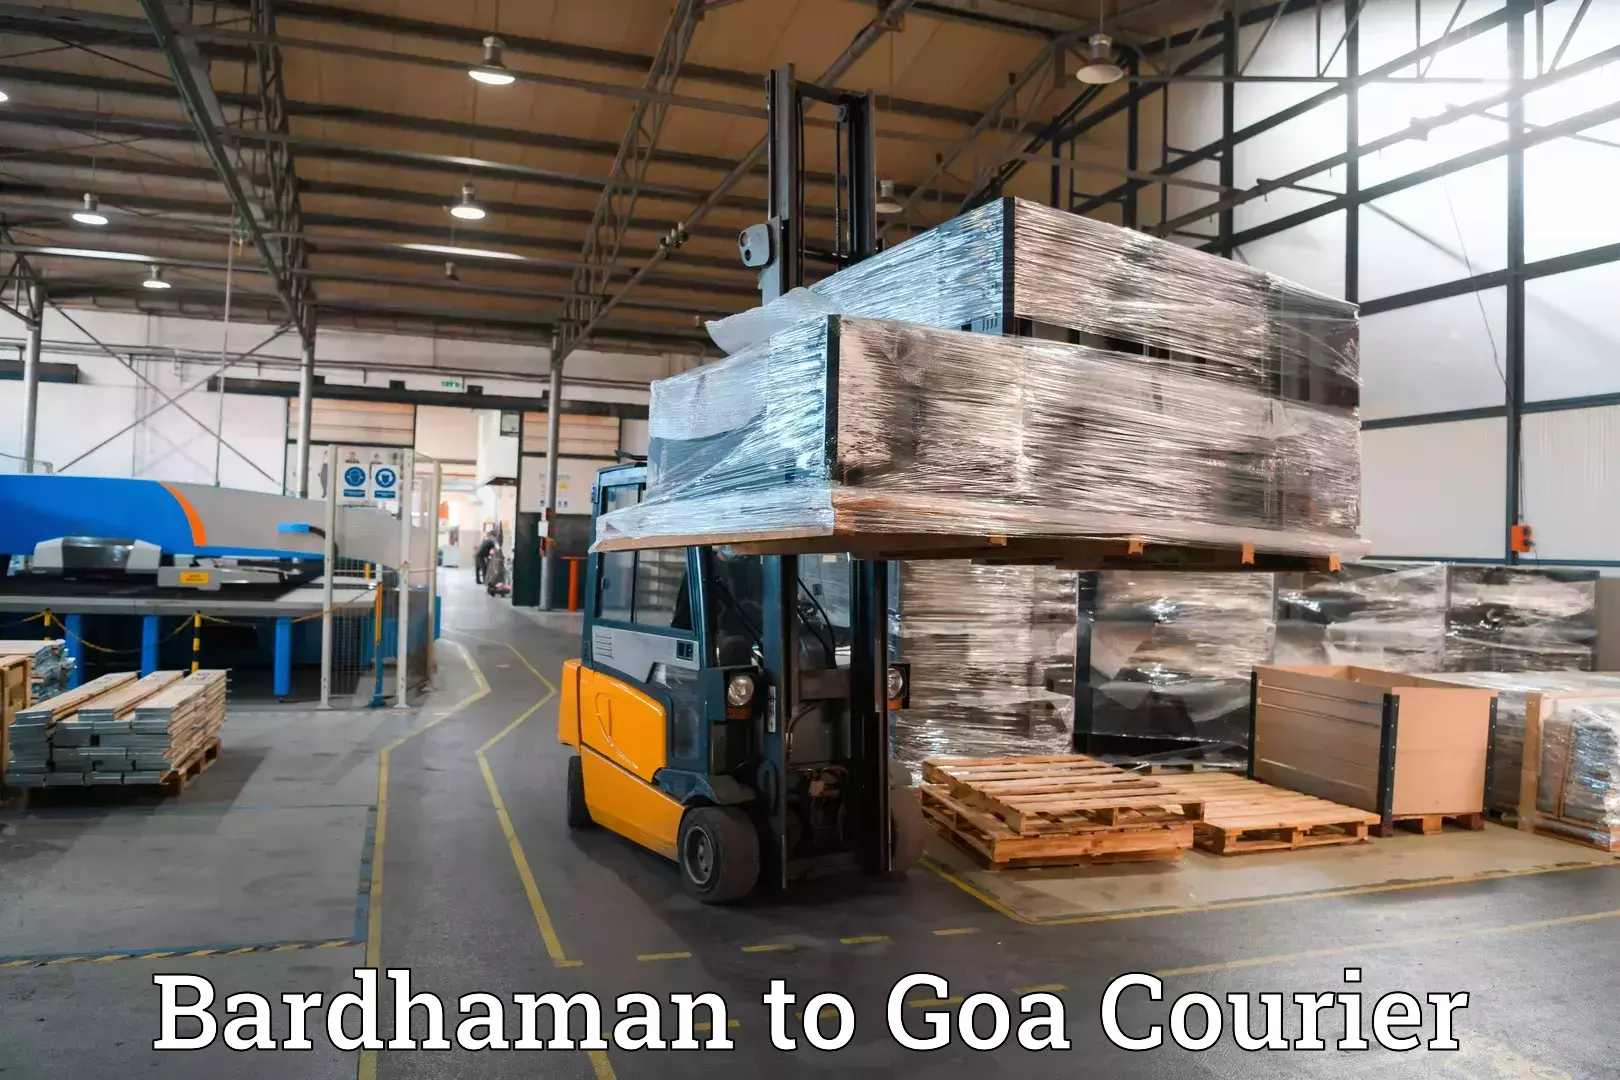 Baggage transport network Bardhaman to South Goa